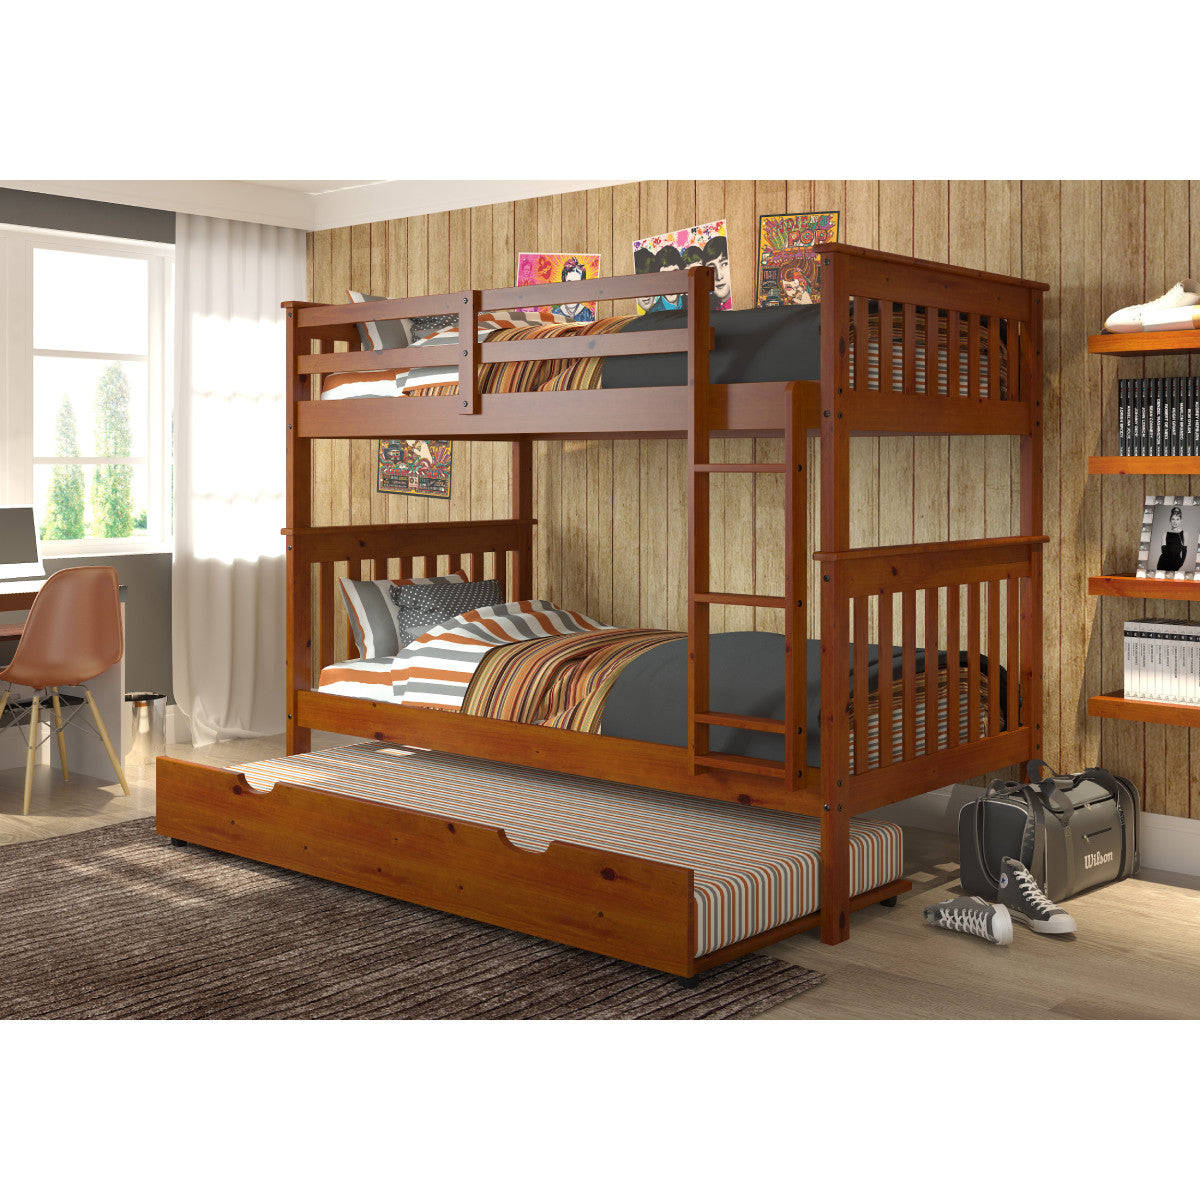 TWIN/TWIN MISSION BUNK BED WITH TRUNDLE BED IN LIGHT ESPRESSO FINISH